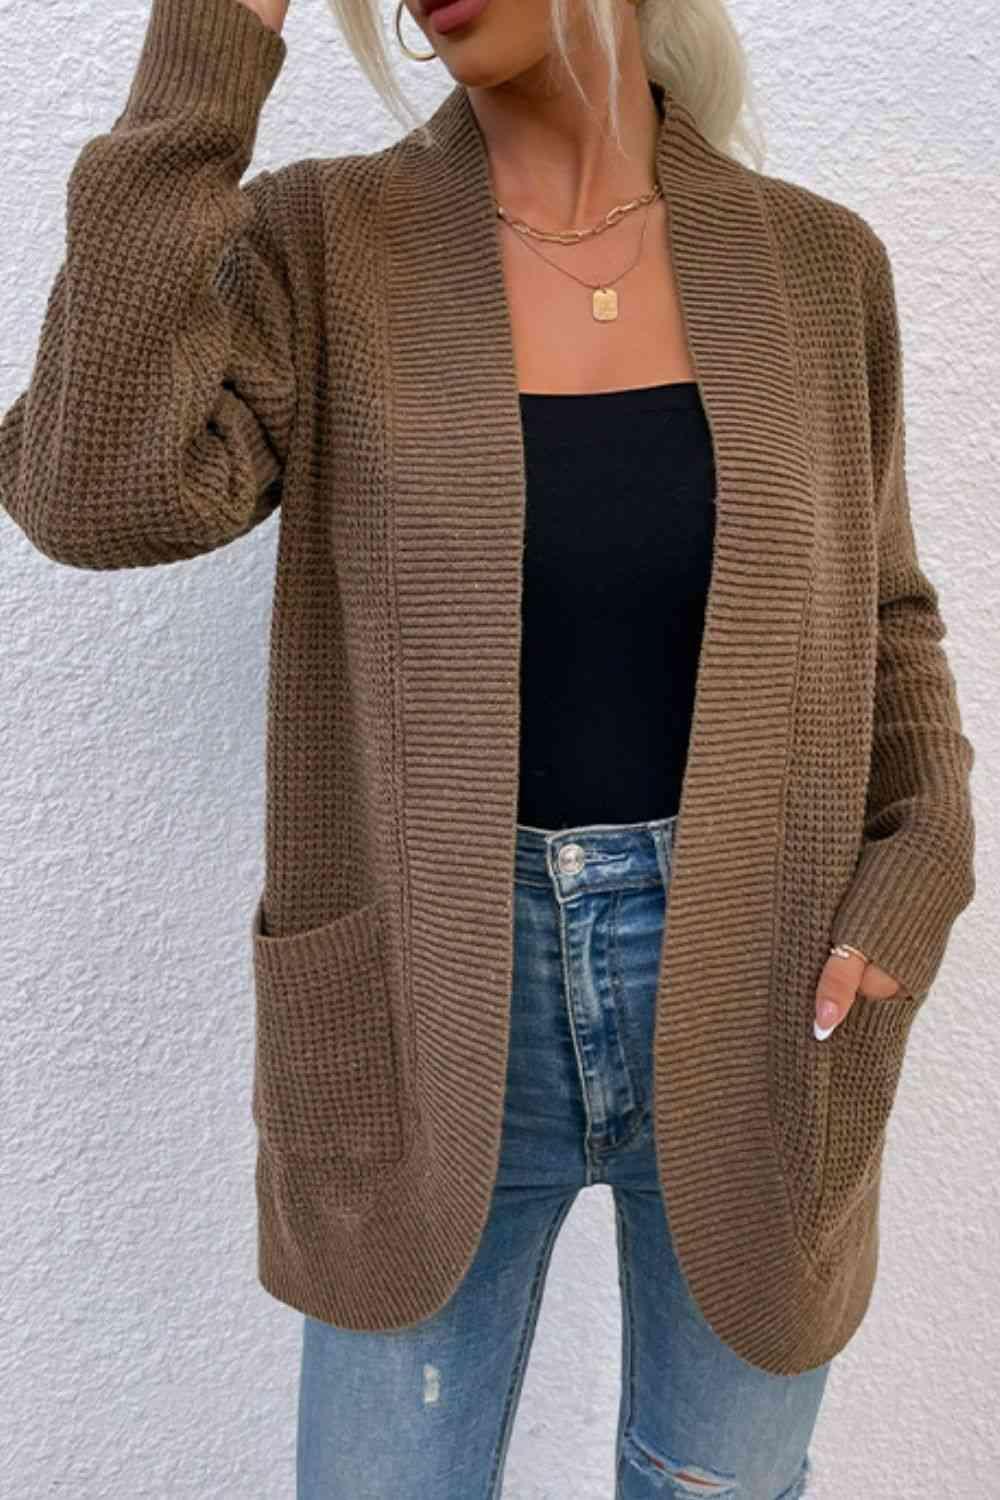 a woman wearing a brown cardigan sweater and ripped jeans